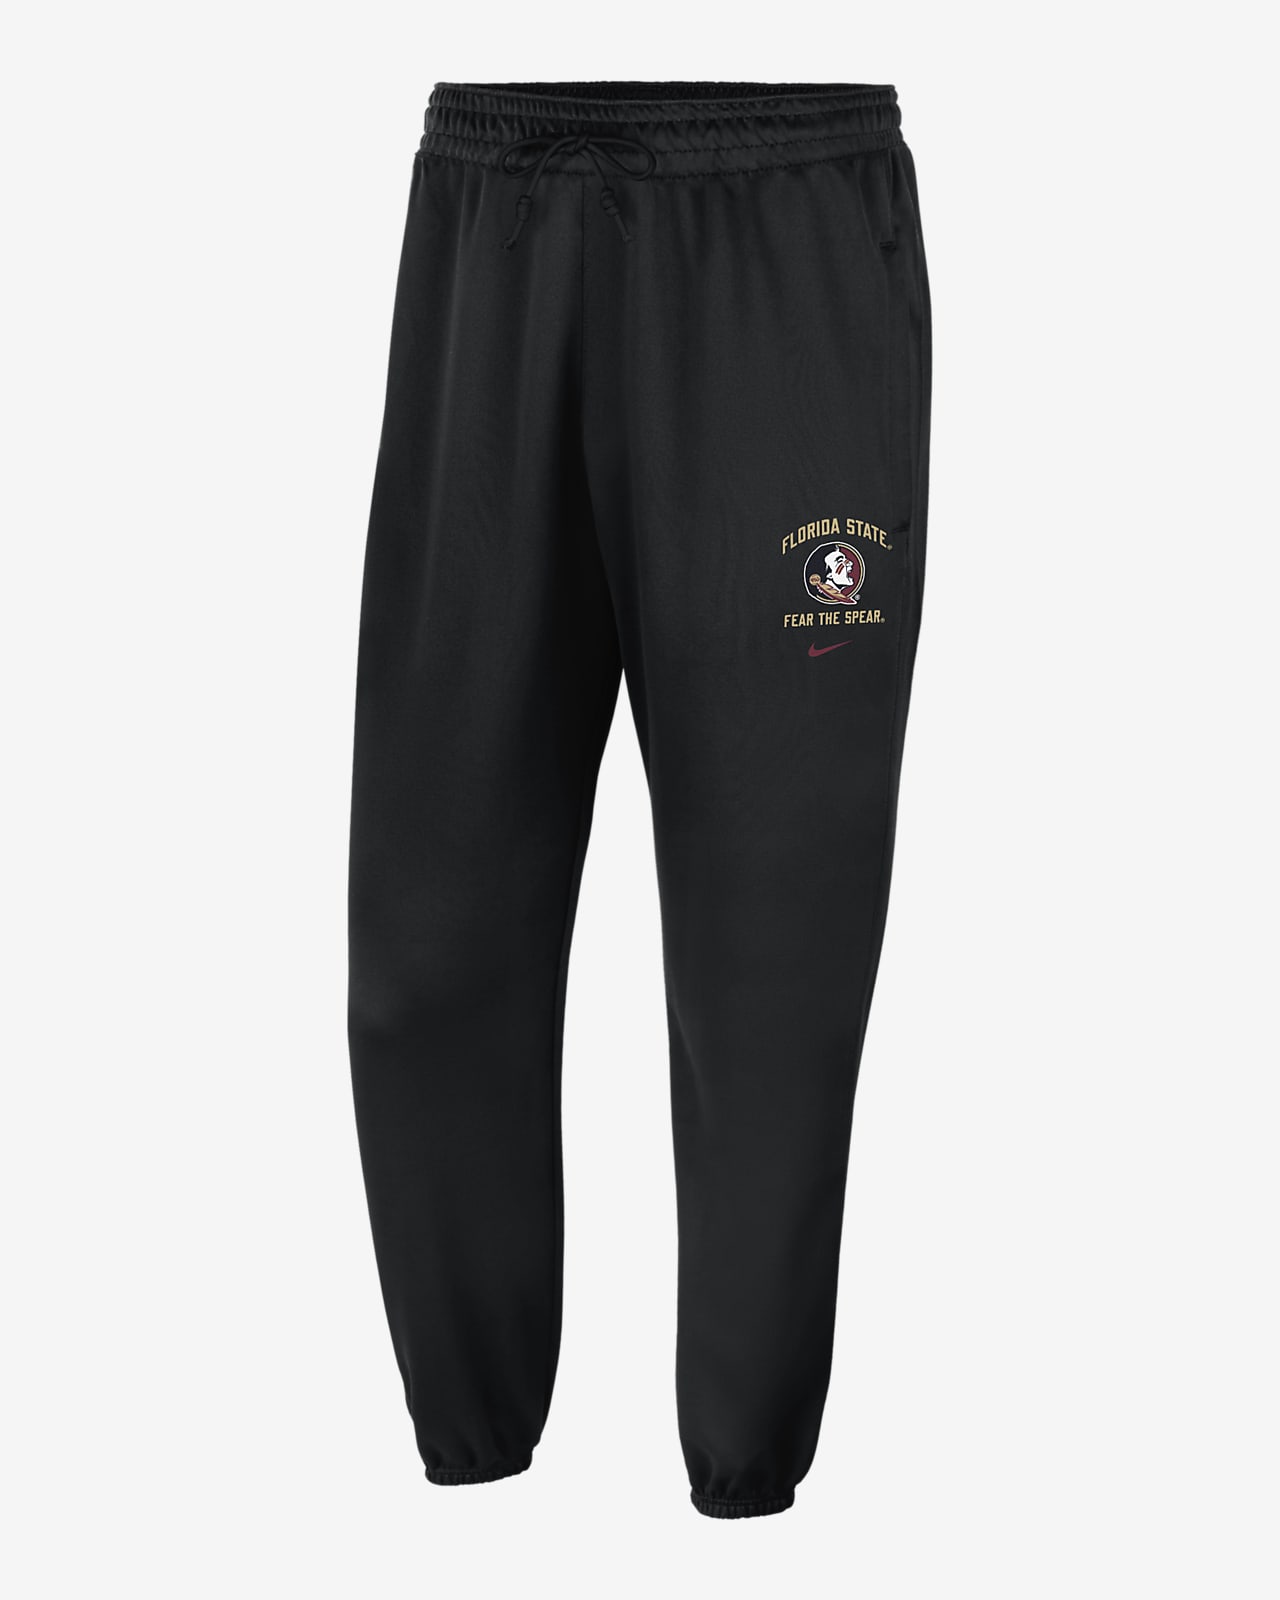 Florida State Standard Issue Men's Nike College Joggers